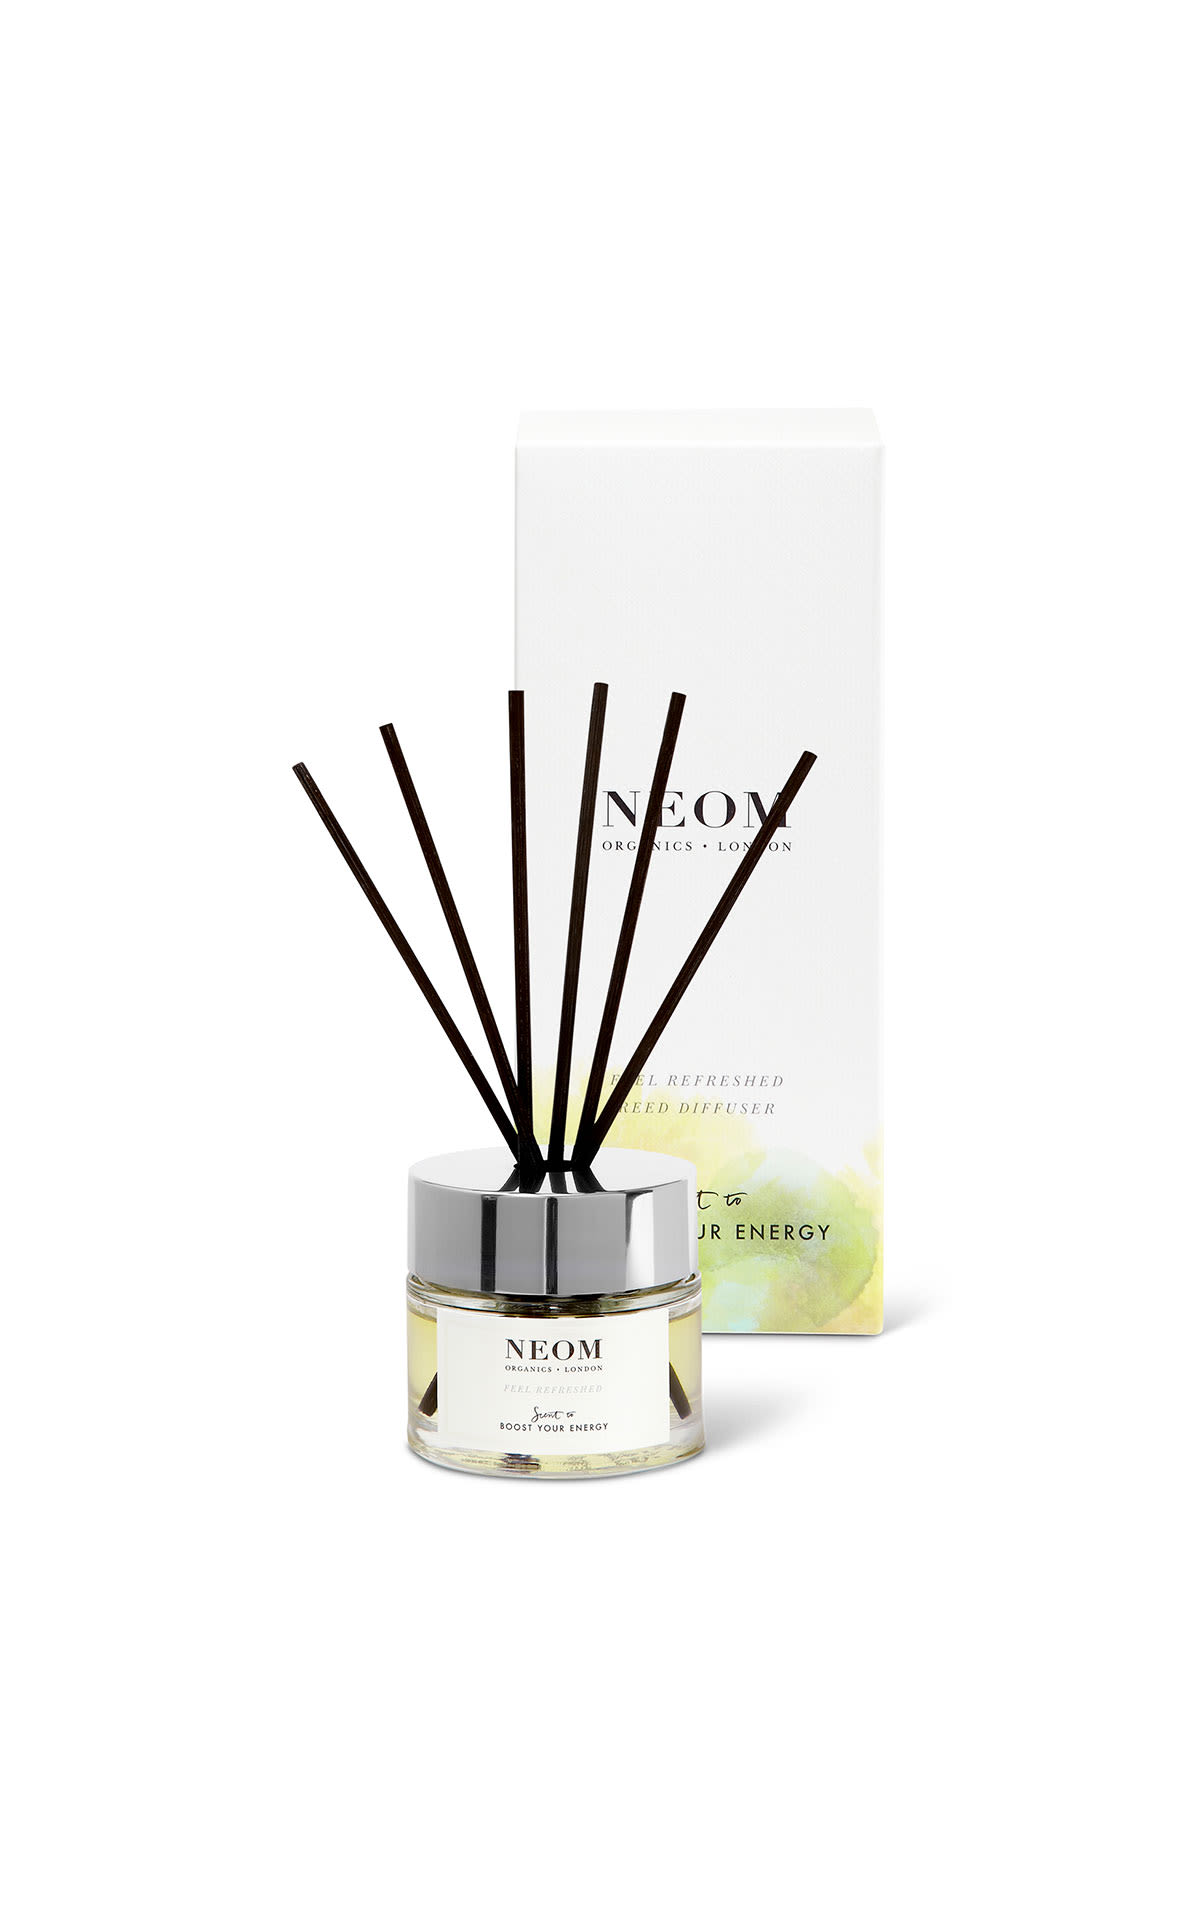 NEOM Feel refreshed reed diffuser from Bicester Village